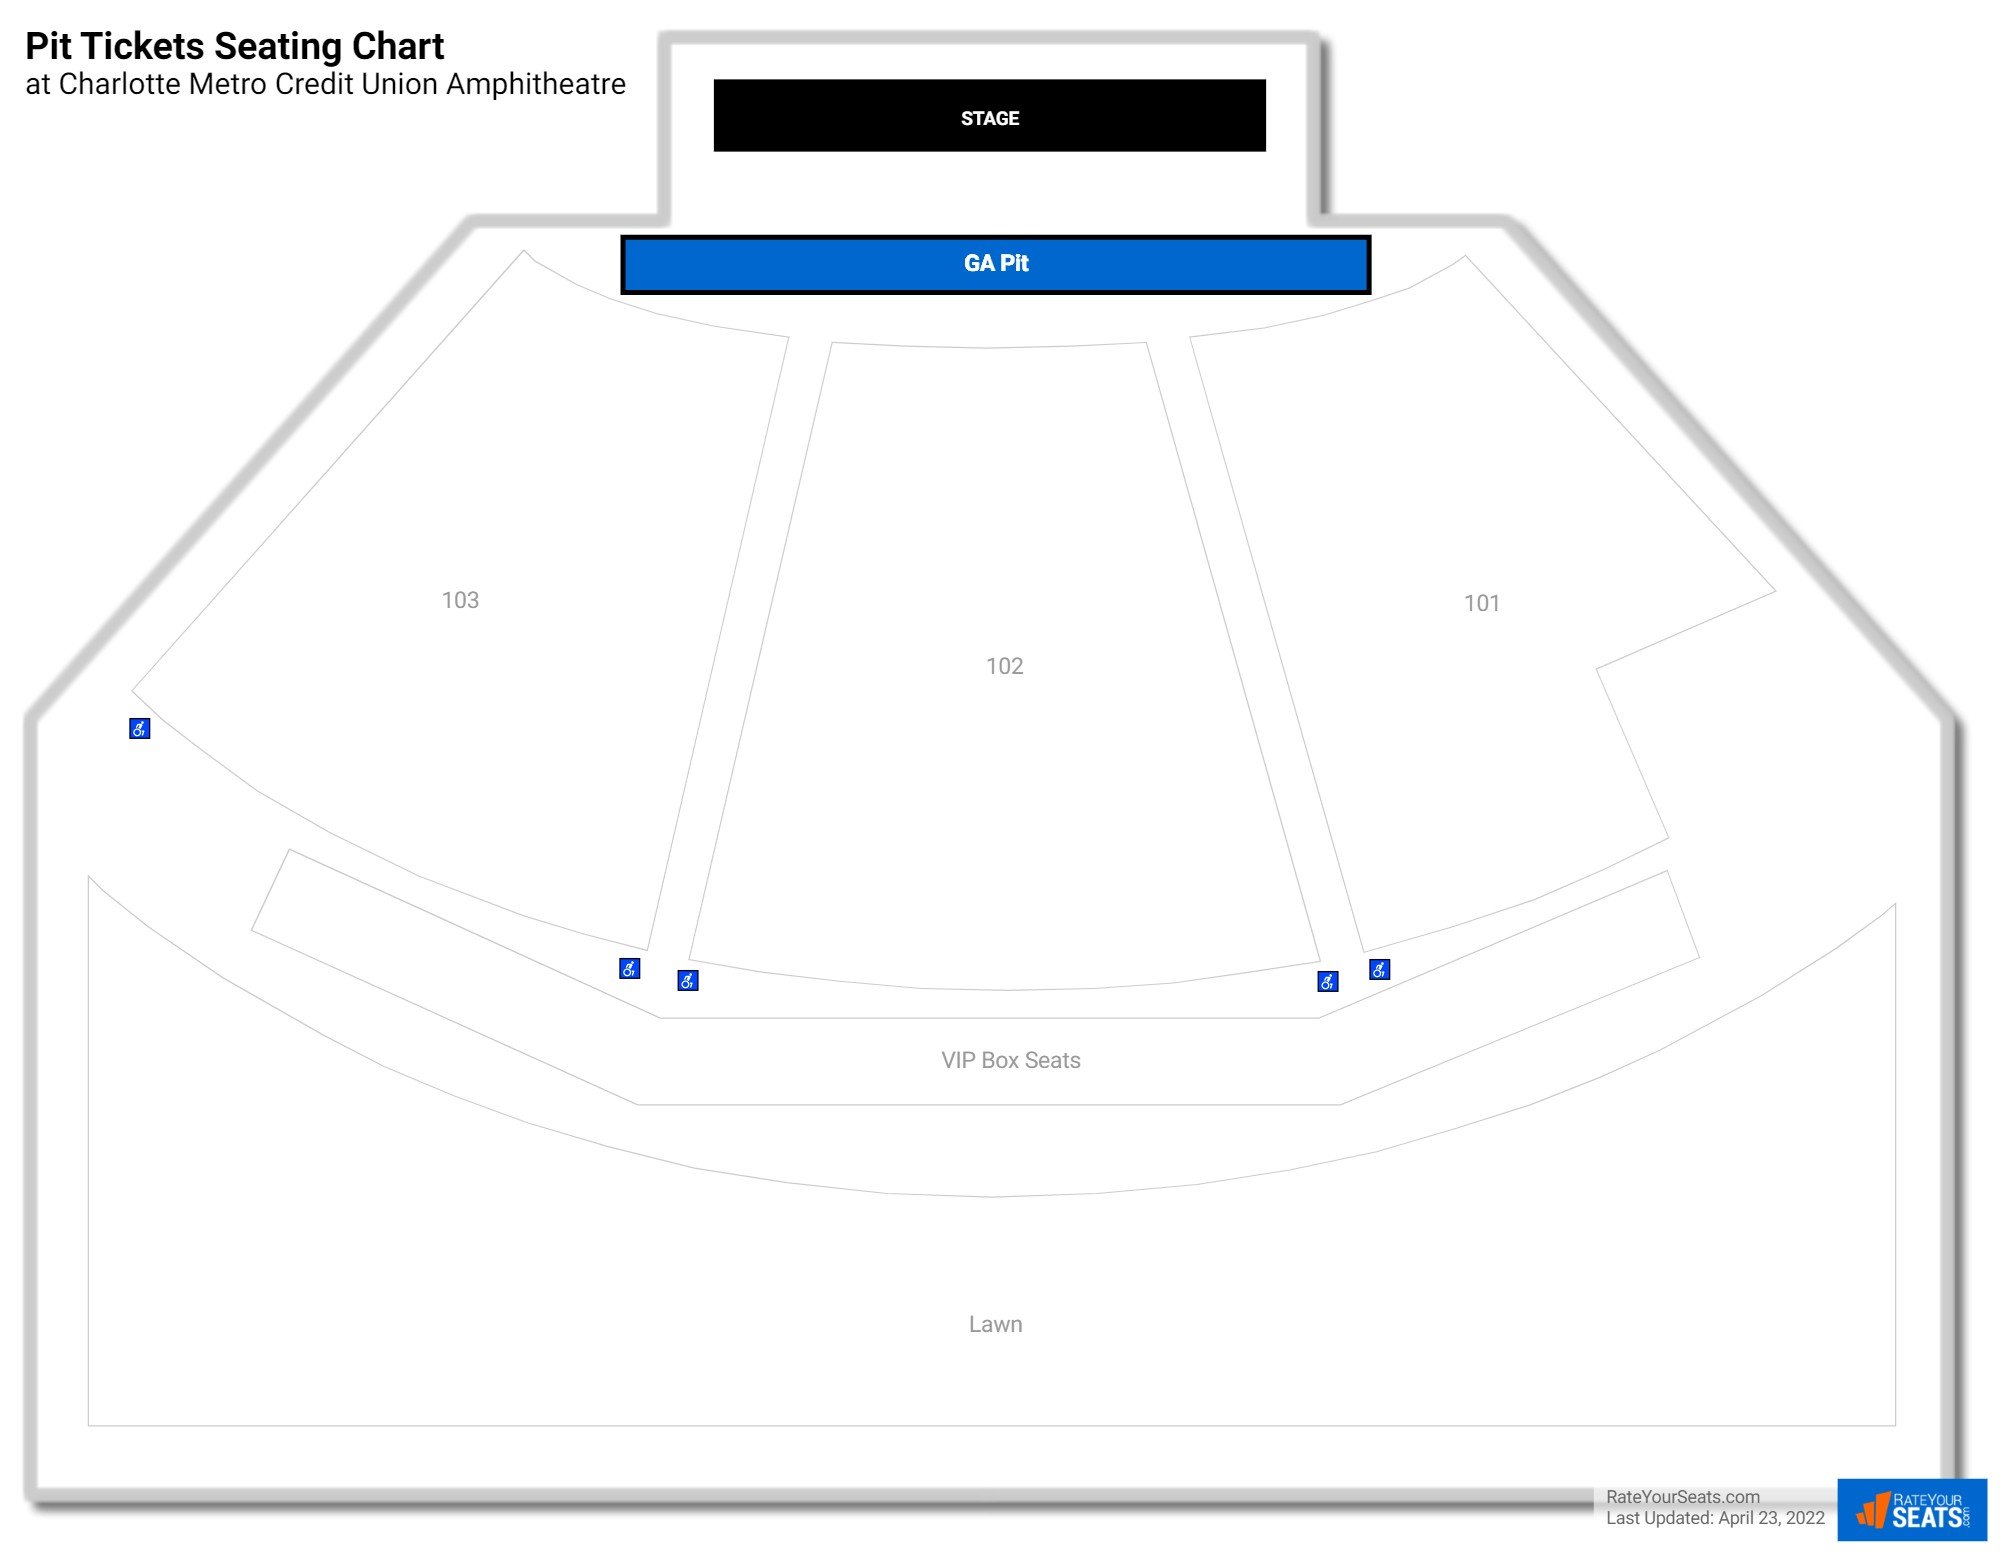 Concert Pit Tickets Seating Chart at Skyla Credit Union Amphitheatre